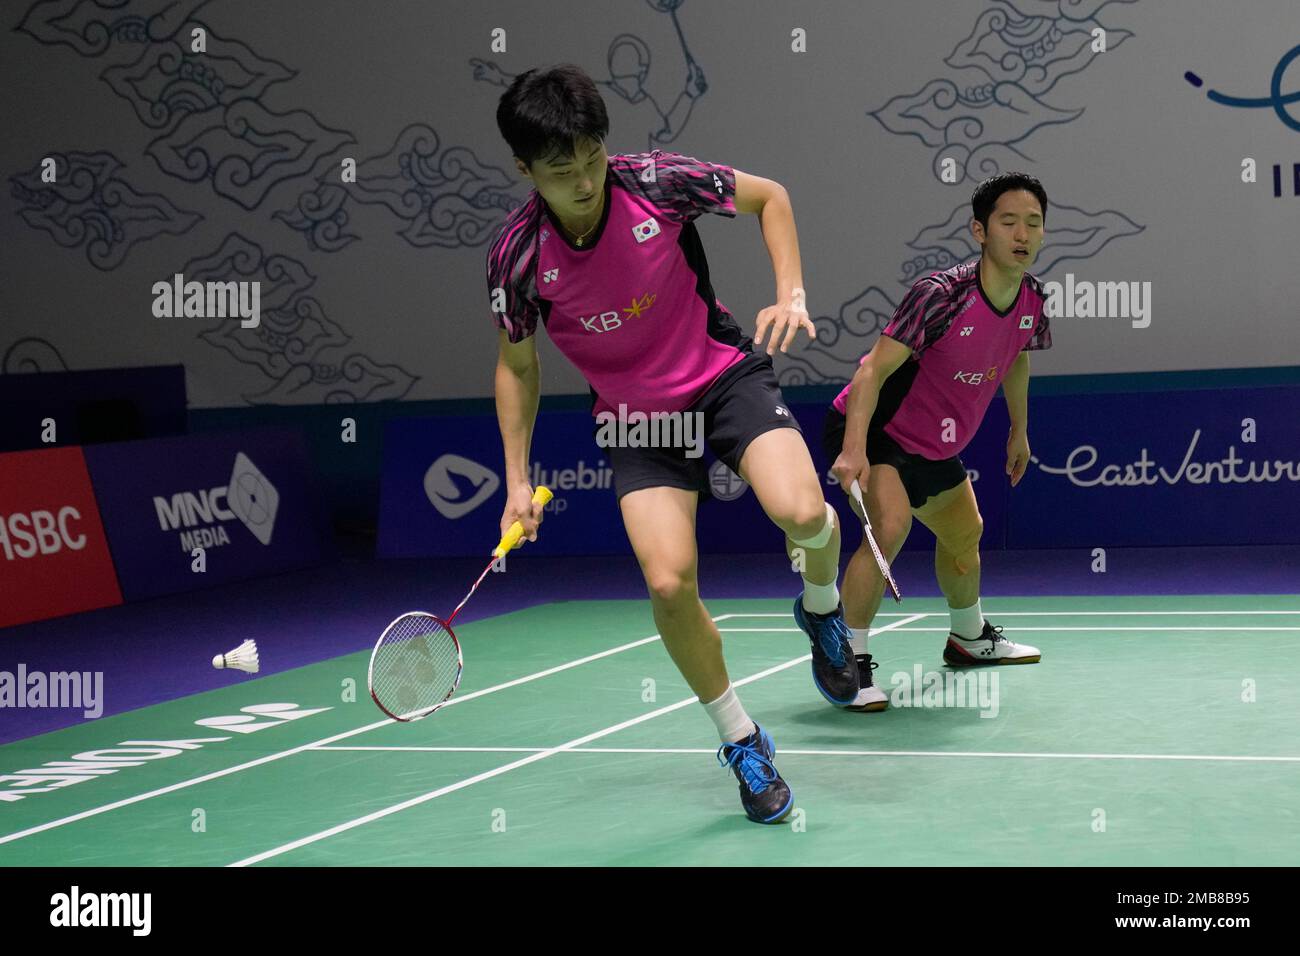 South Koreas Choi Sol-gyu, right, and Kim Won-ho compete against their compatriots Kang Min-hyuk and Seo Sung-jae during their mens doubles quarterfinal match at Indonesia Open badminton tournament at Istora Gelora Bung